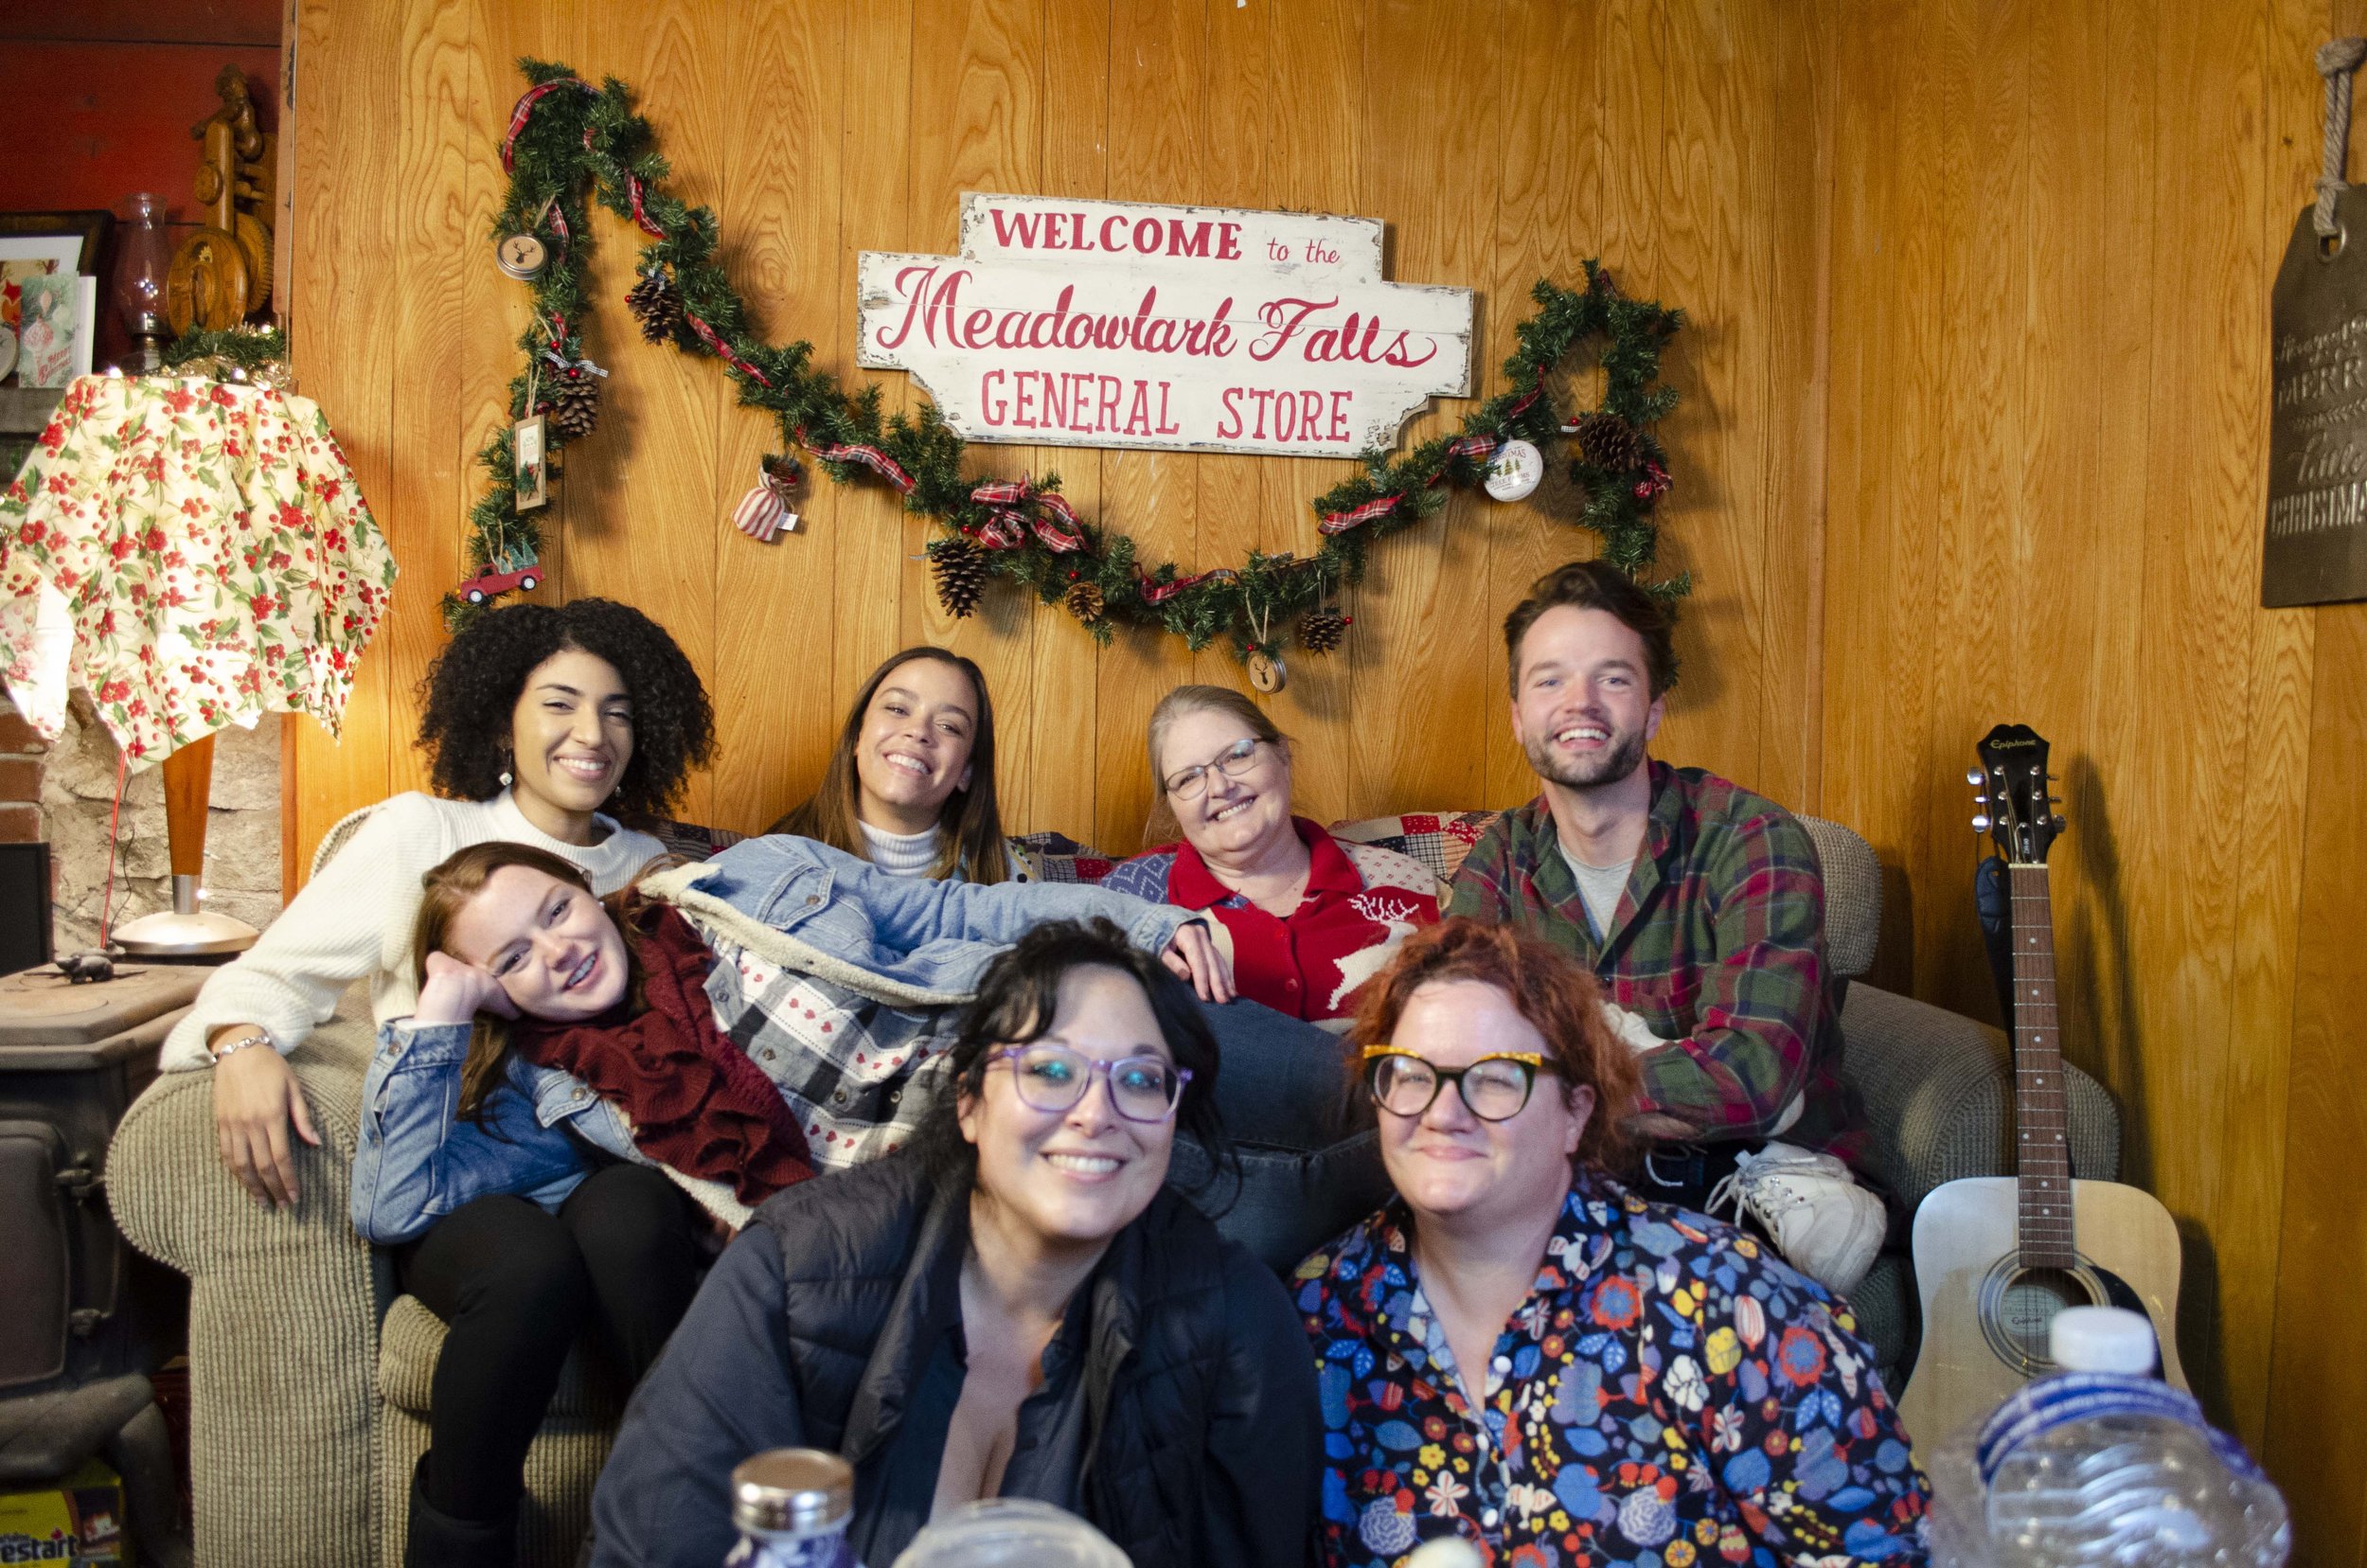 Welcome to Meadowlark Falls: The Very Merry Christmas Contest